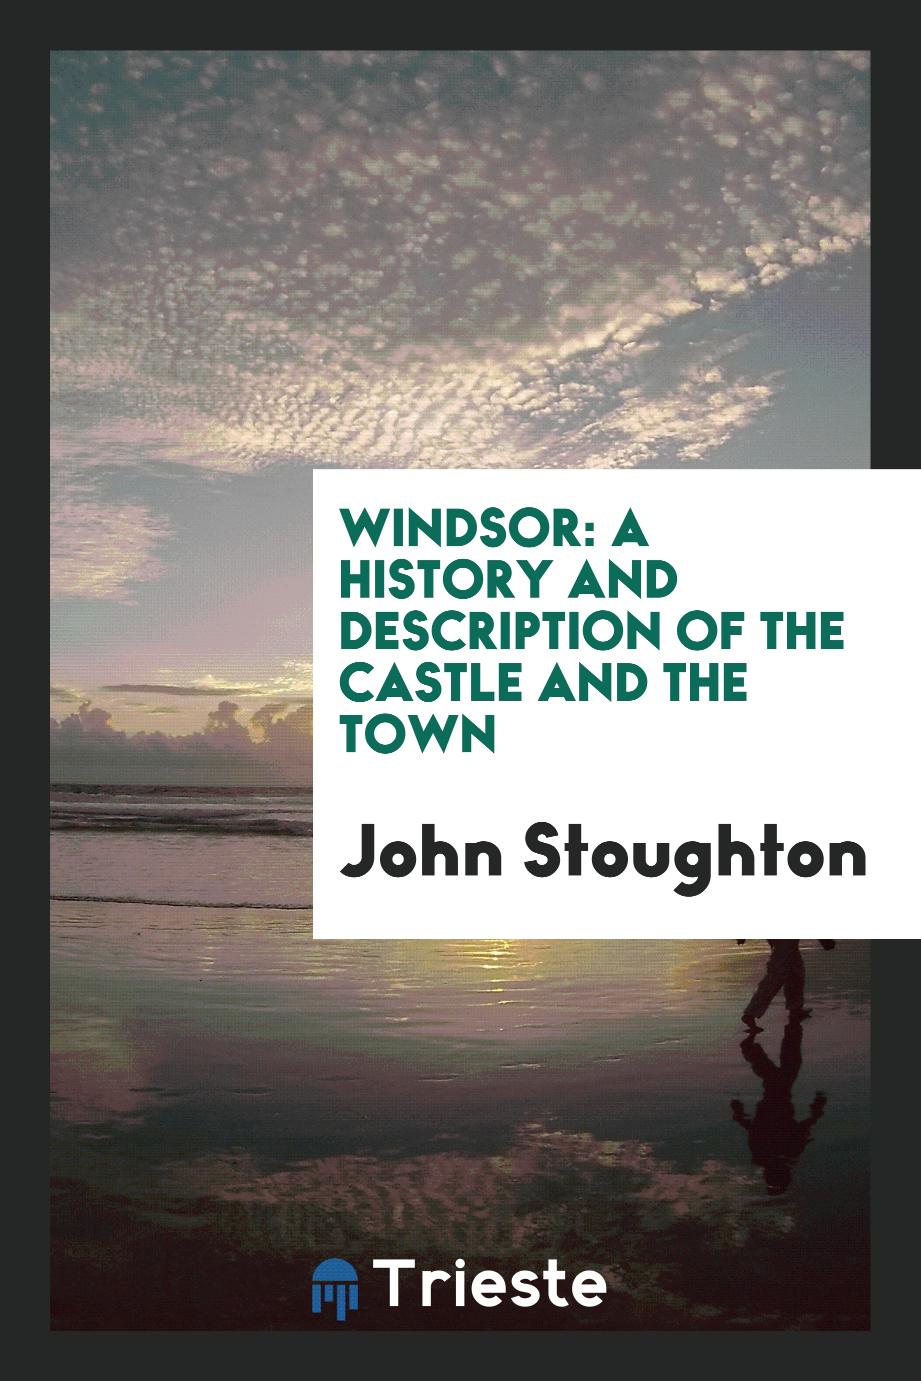 Windsor: A history and description of the castle and the town